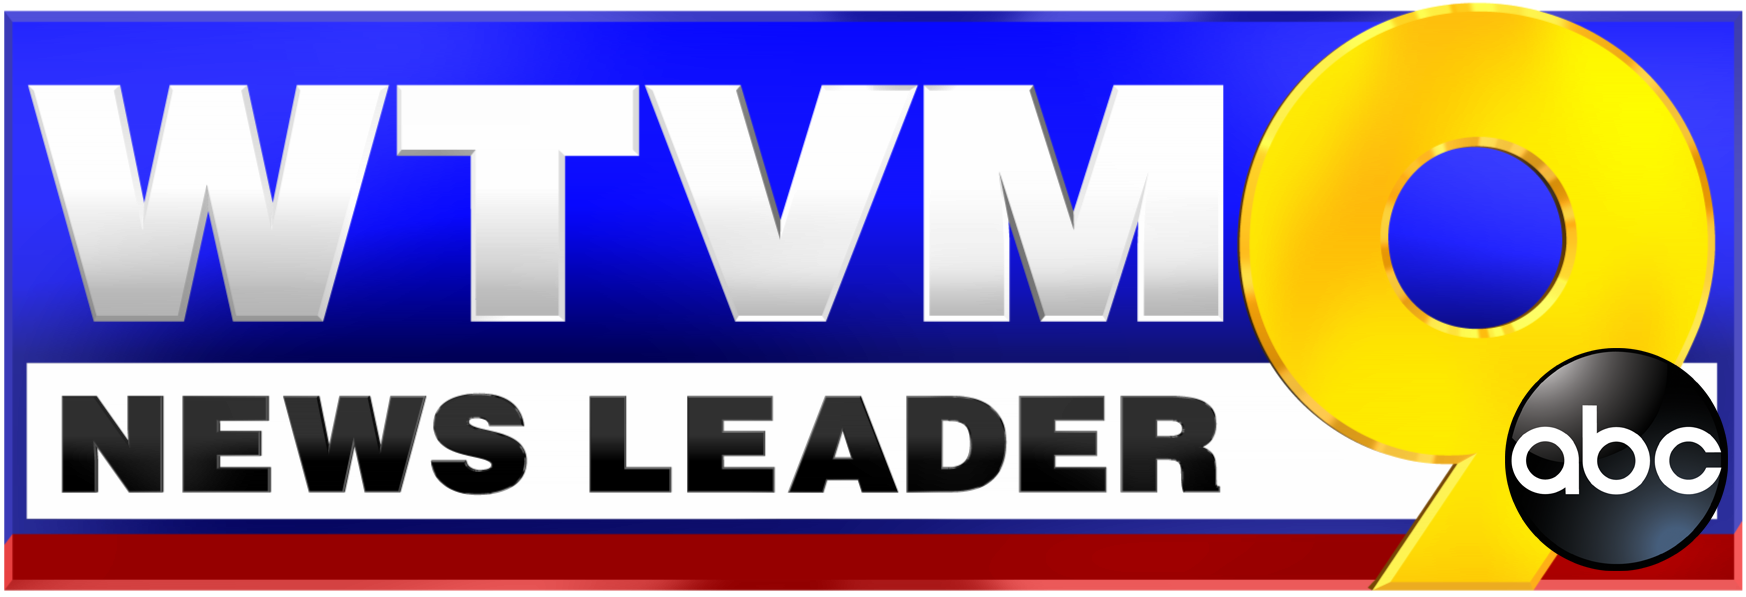 WTVM_STATION_LOGO_STATIC_1080 w_ABC.png